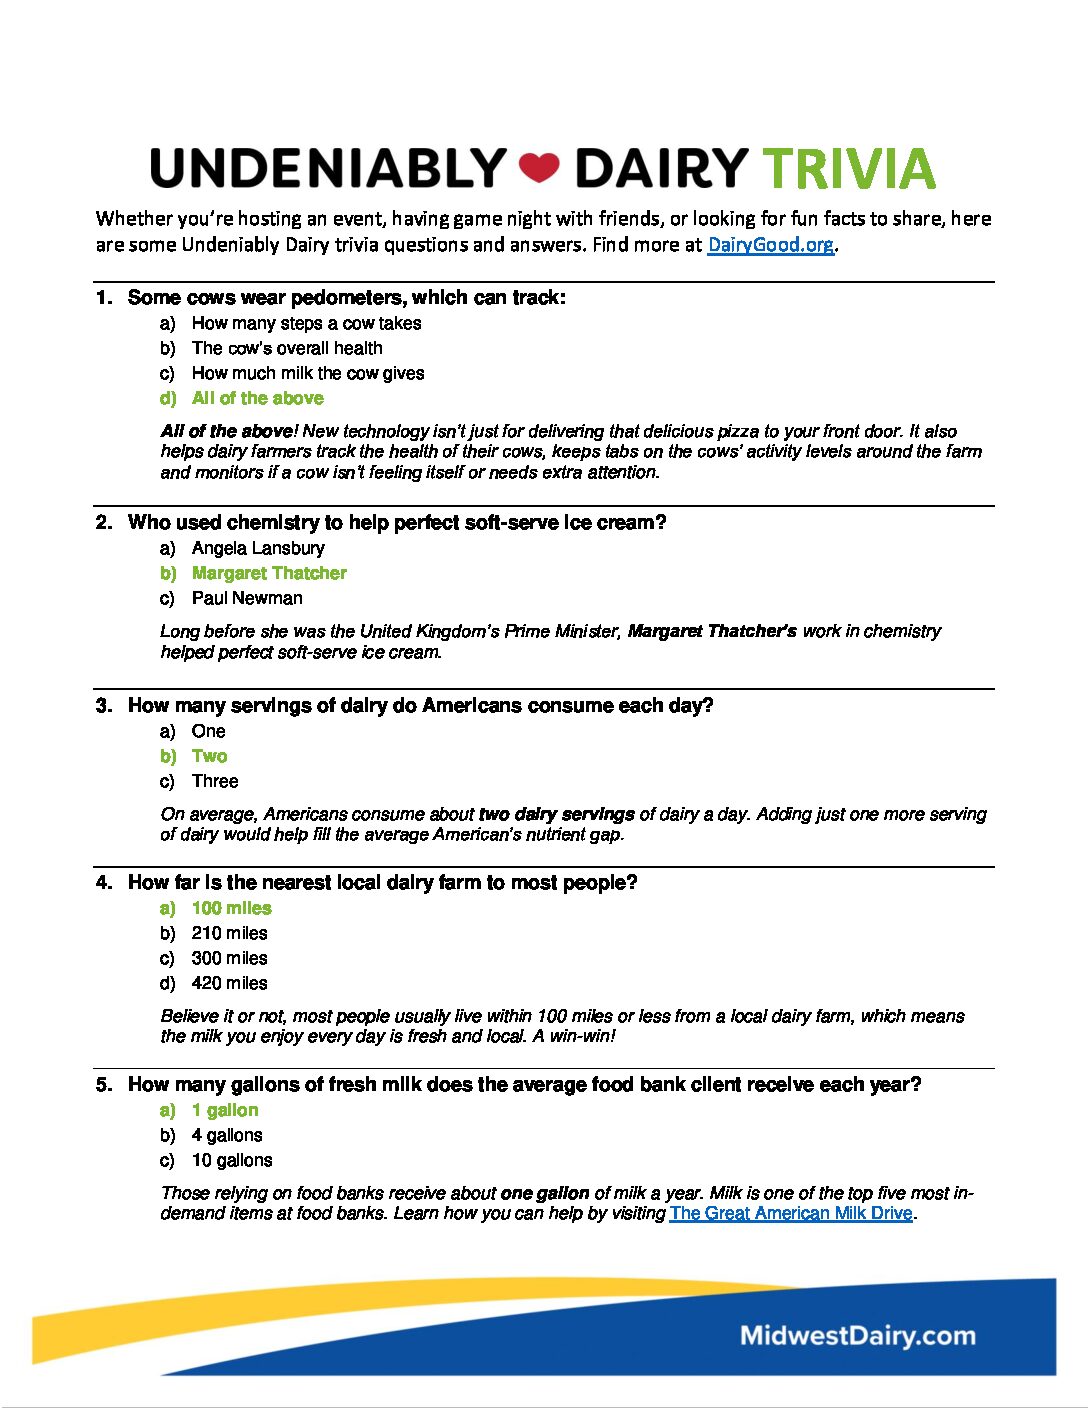 Dairy Trivia Midwest Dairy